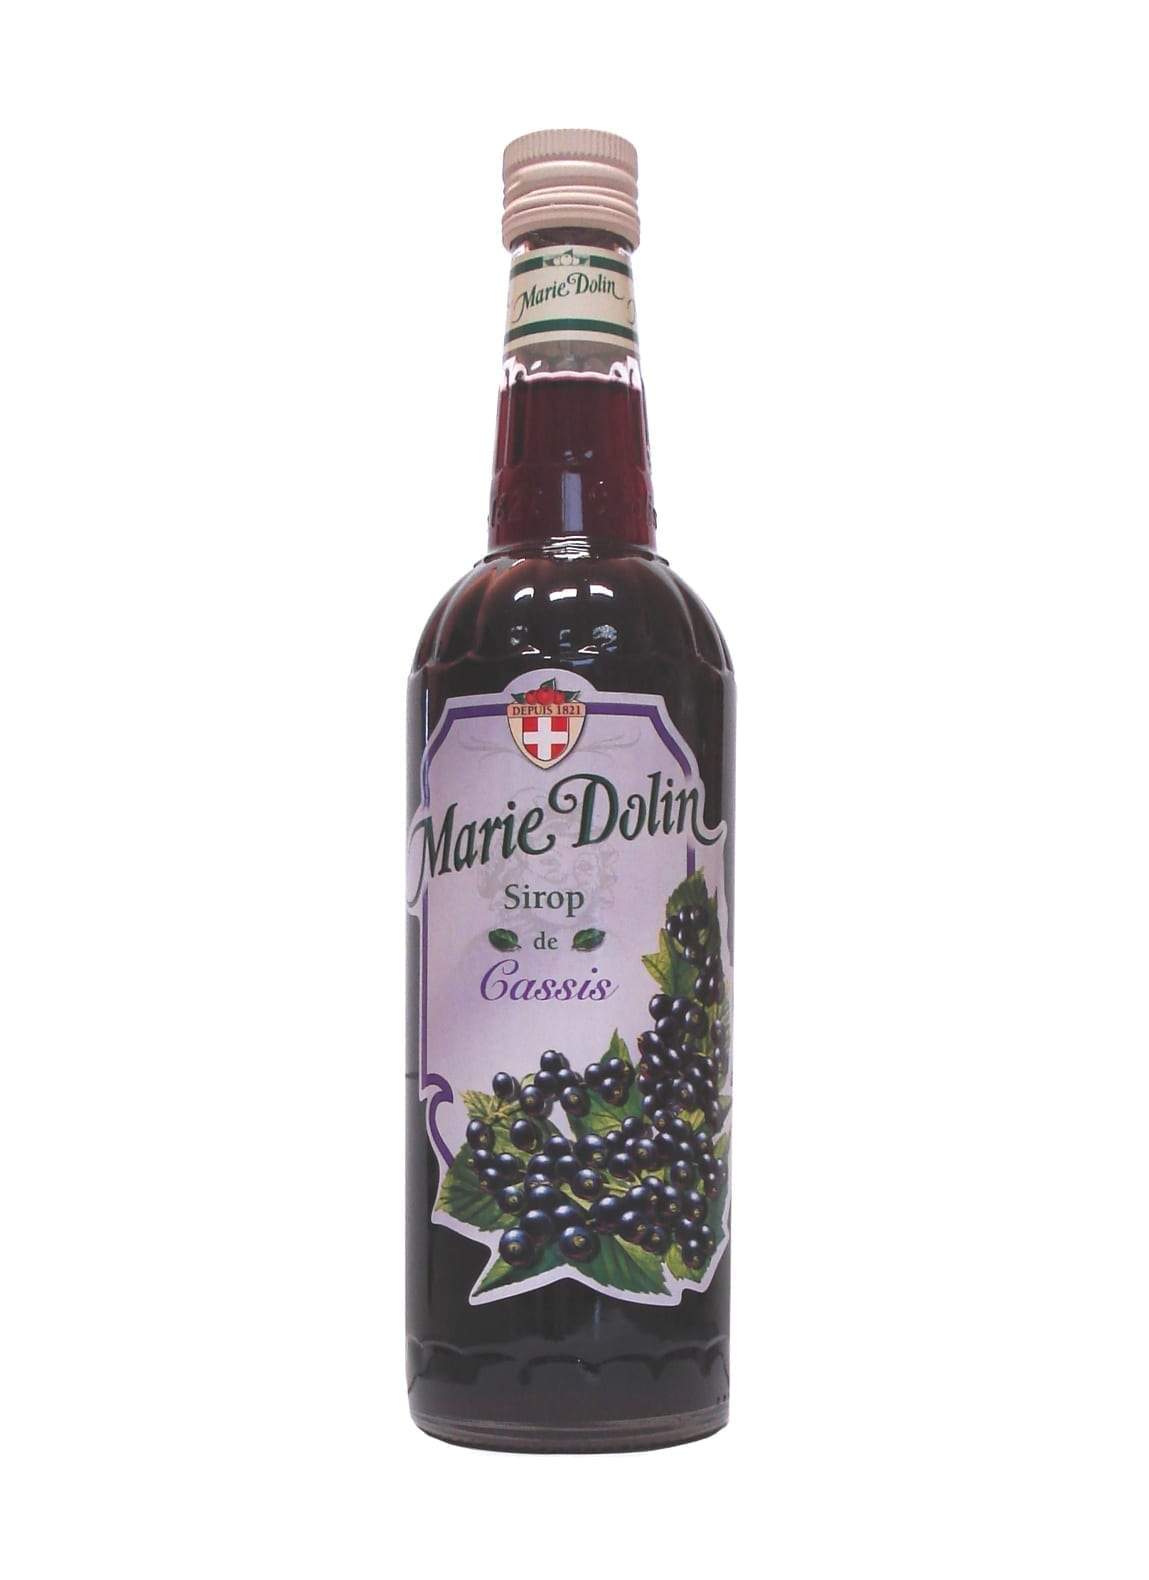 Marie Dolin Sirop de Cassis (Blackcurrant) Syrup 700ml | Syrup | Shop online at Spirits of France